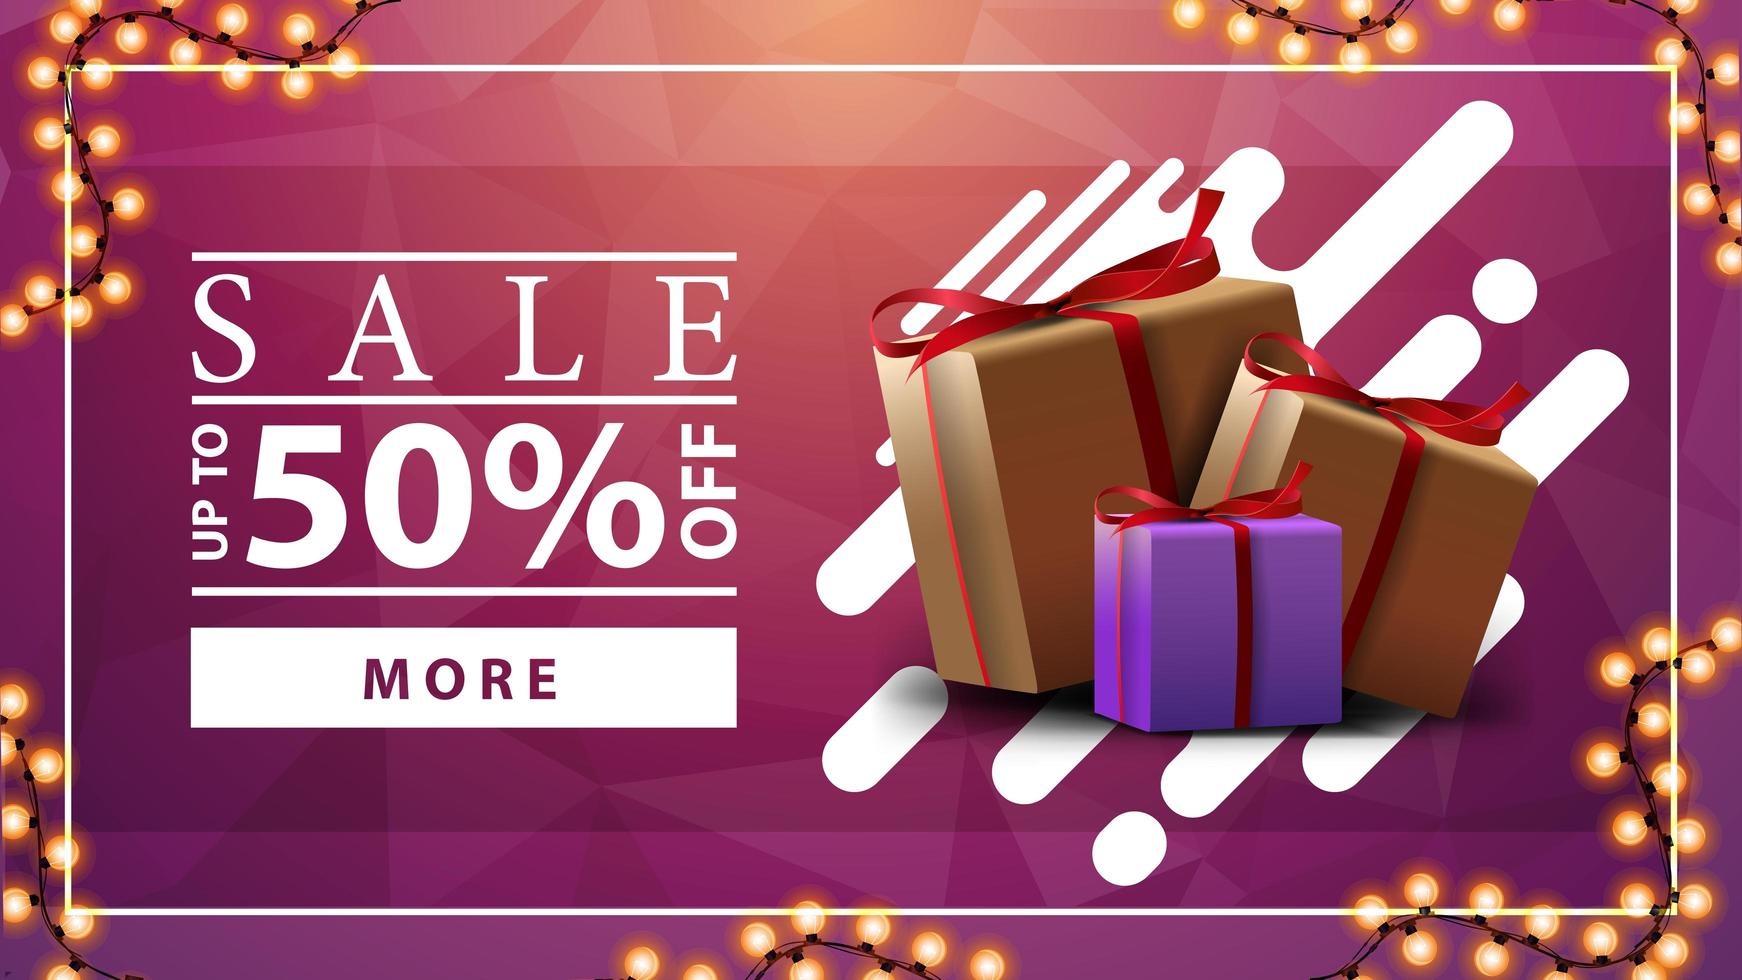 Sale, up to 50 off, pink horizontal discount banner with garland and gift boxes vector